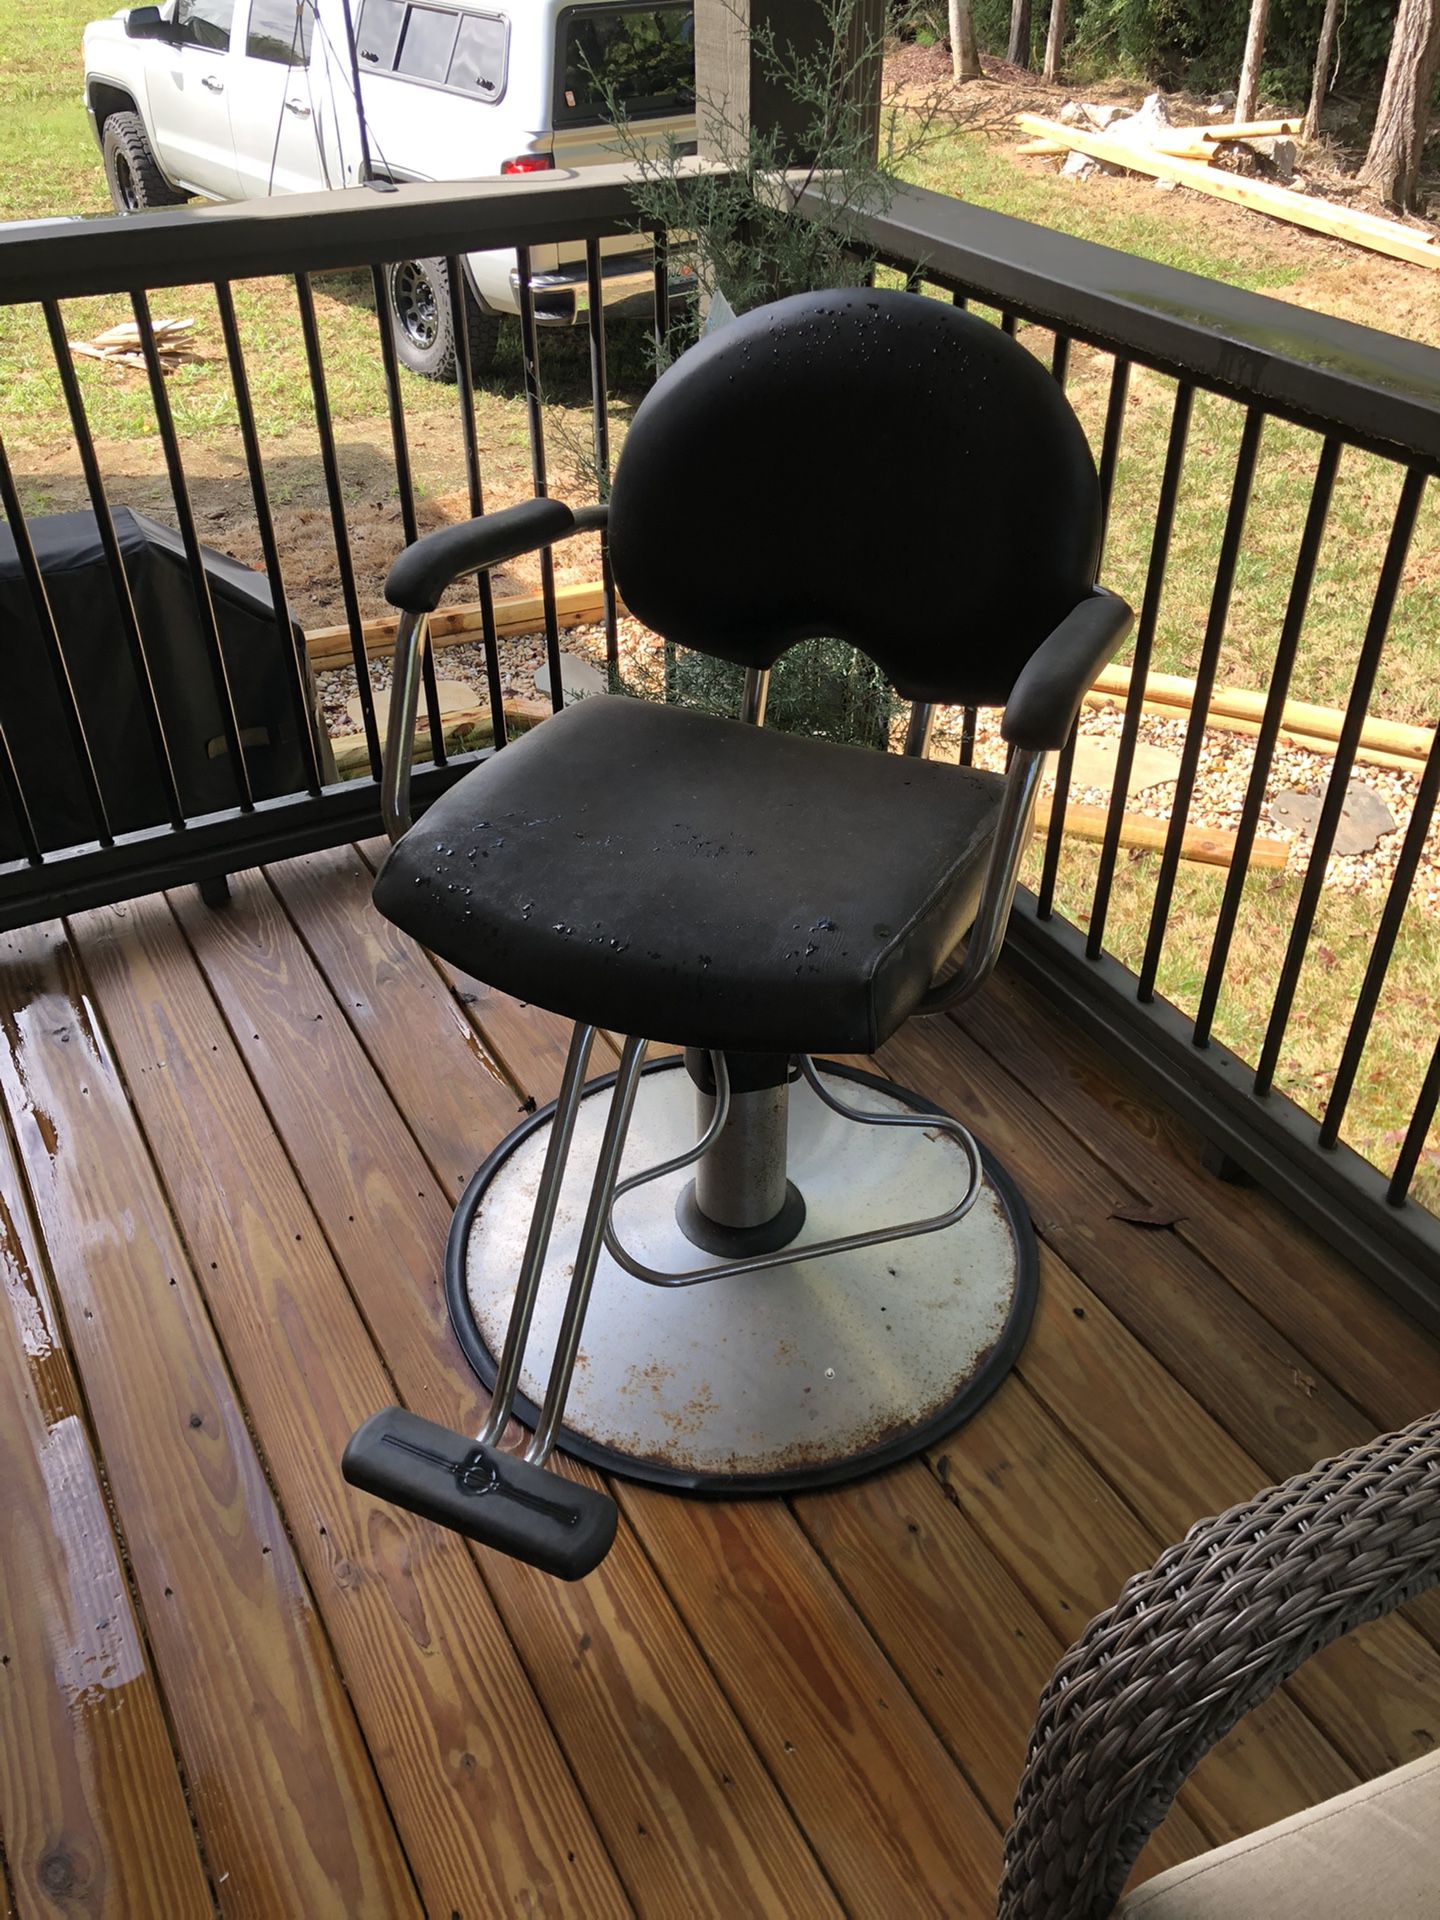 BARBER CHAIR $100